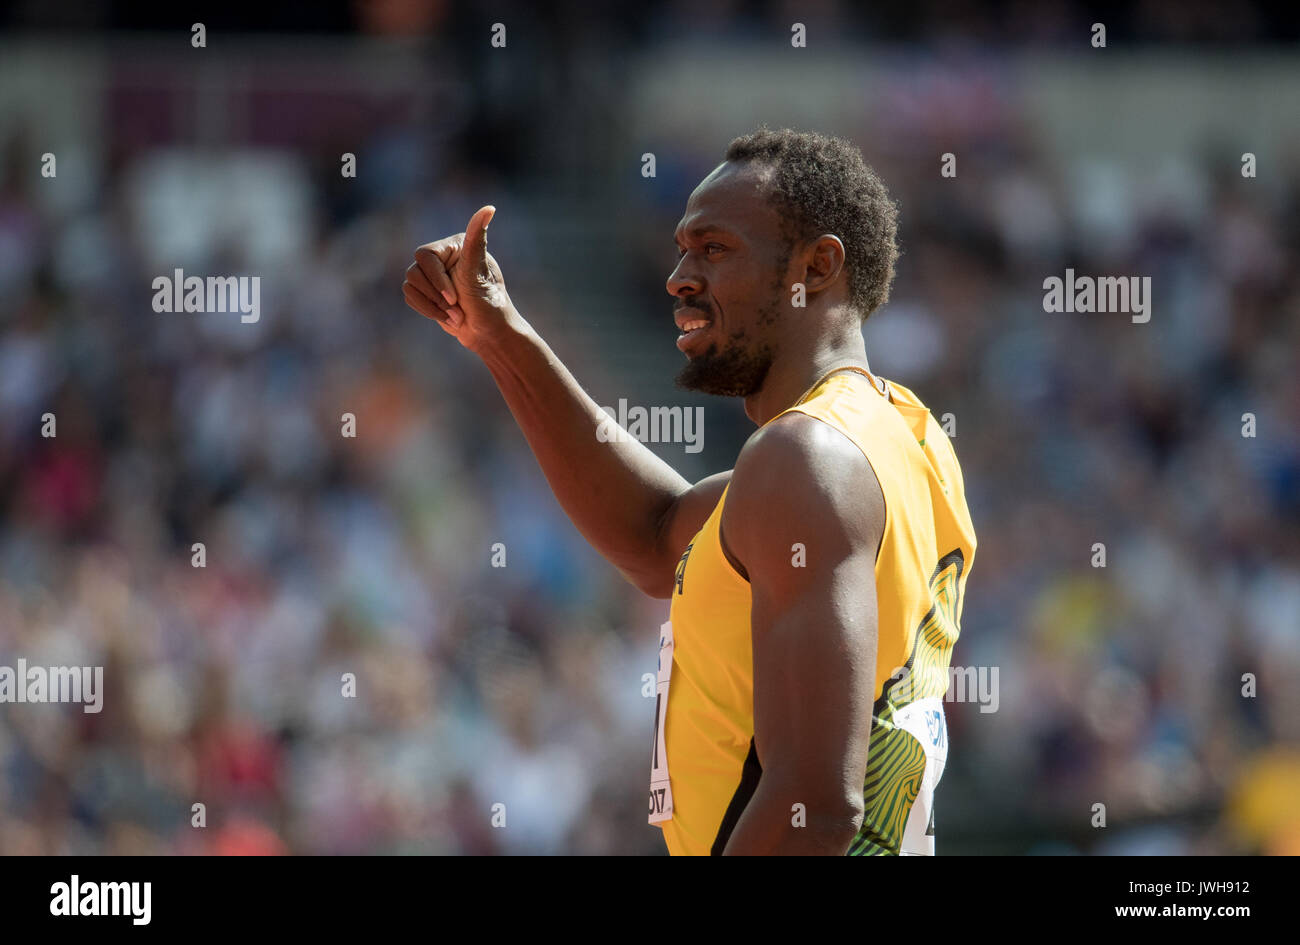 London, UK. 12th Aug, 2017. Usain BOLT of Jamaica gives a thumb up before his 4x100 metre heat during the IAAF World Athletics Championships 2017 on DAY 9 at the Olympic Park, London, England on 12 August 2017. Photo by Andy Rowland/PRiME Media Images. Credit: Andrew Rowland/Alamy Live News Stock Photo